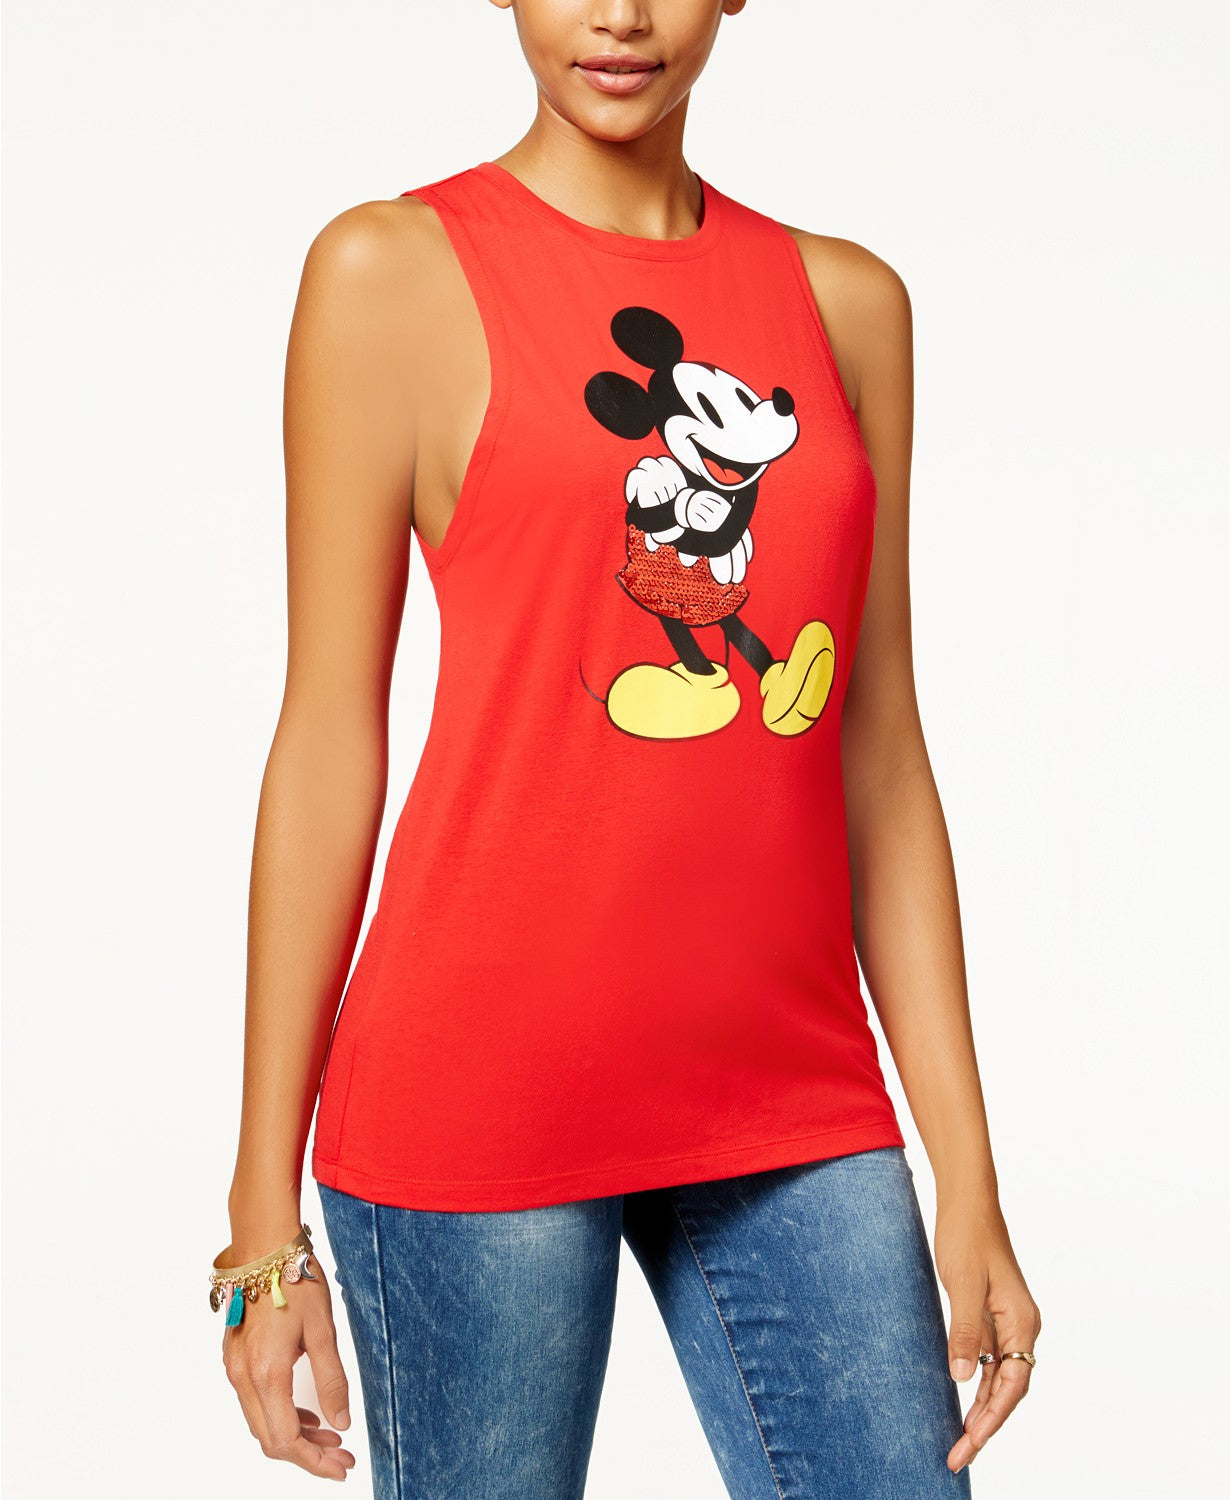 Disney Juniors Embellished Mickey Mo Red L